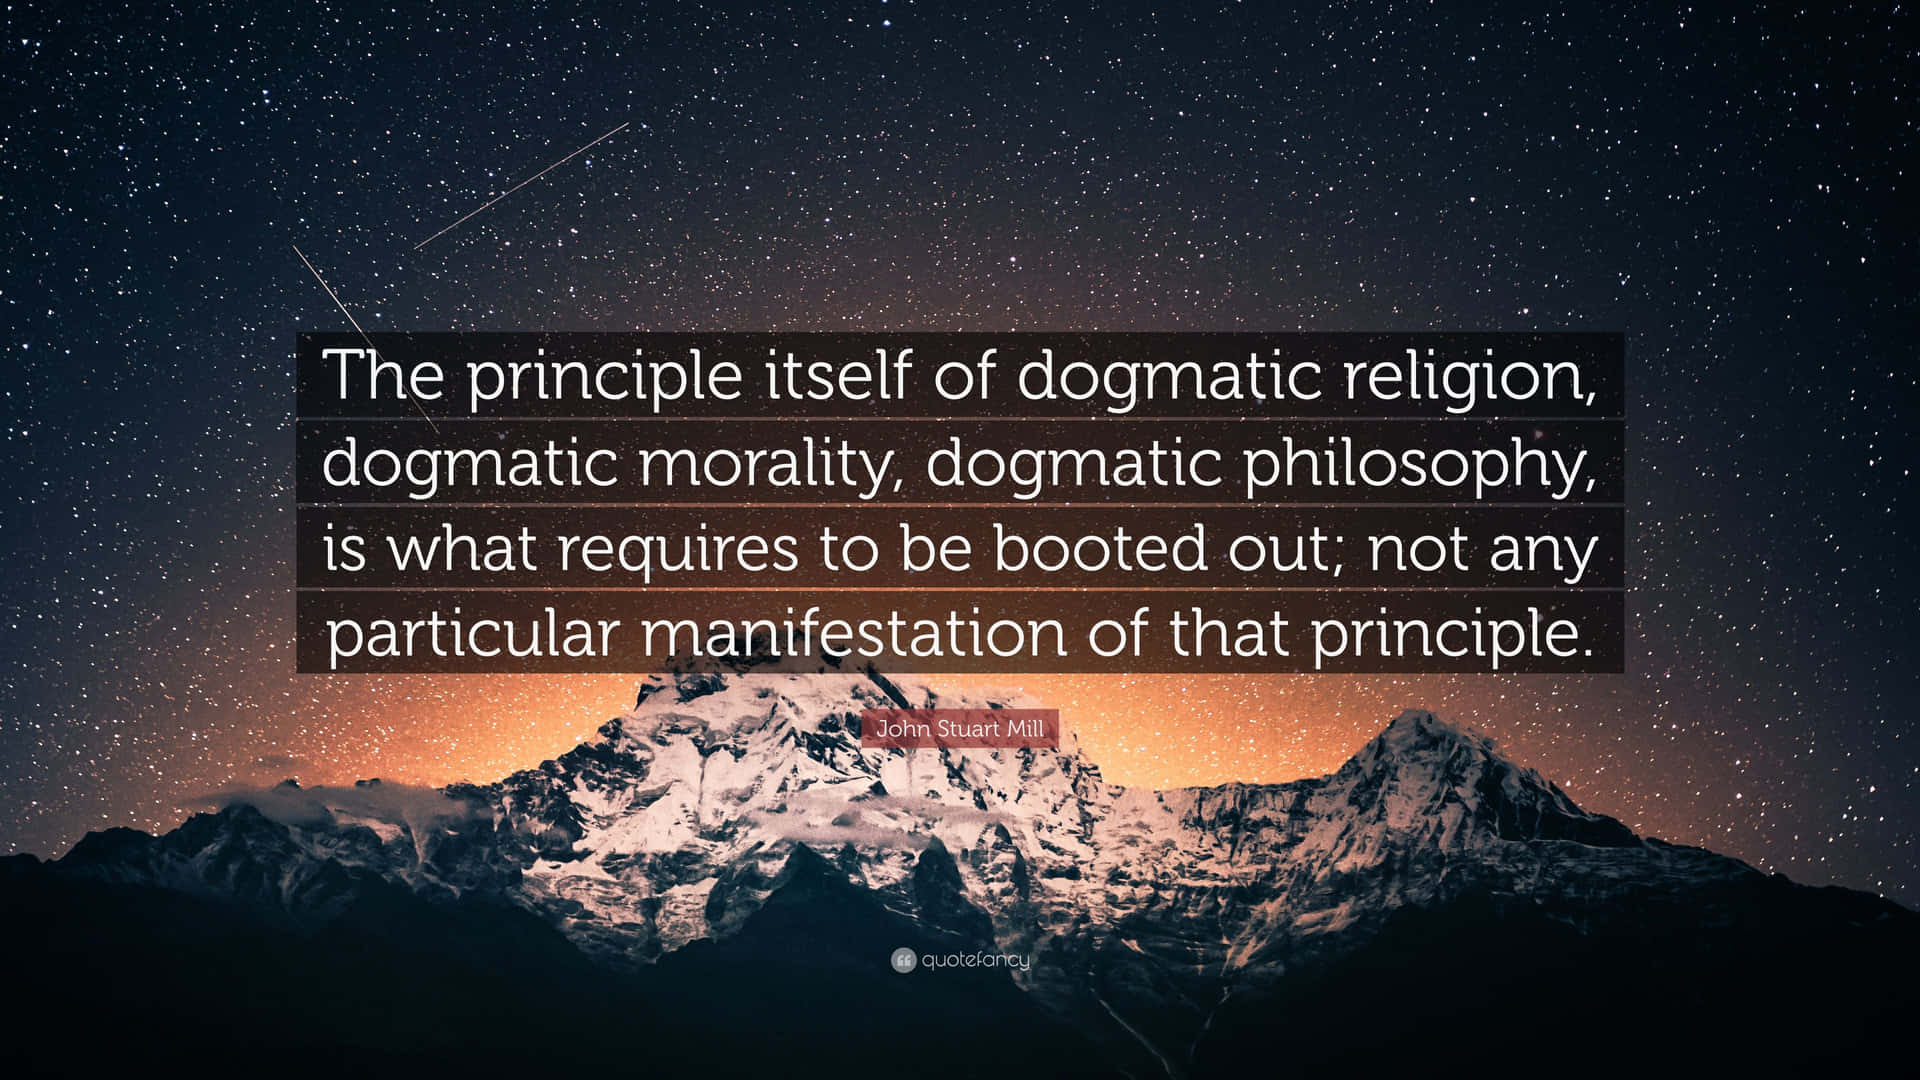 Dogmatic Religion, Morality, And Philosphy Wallpaper